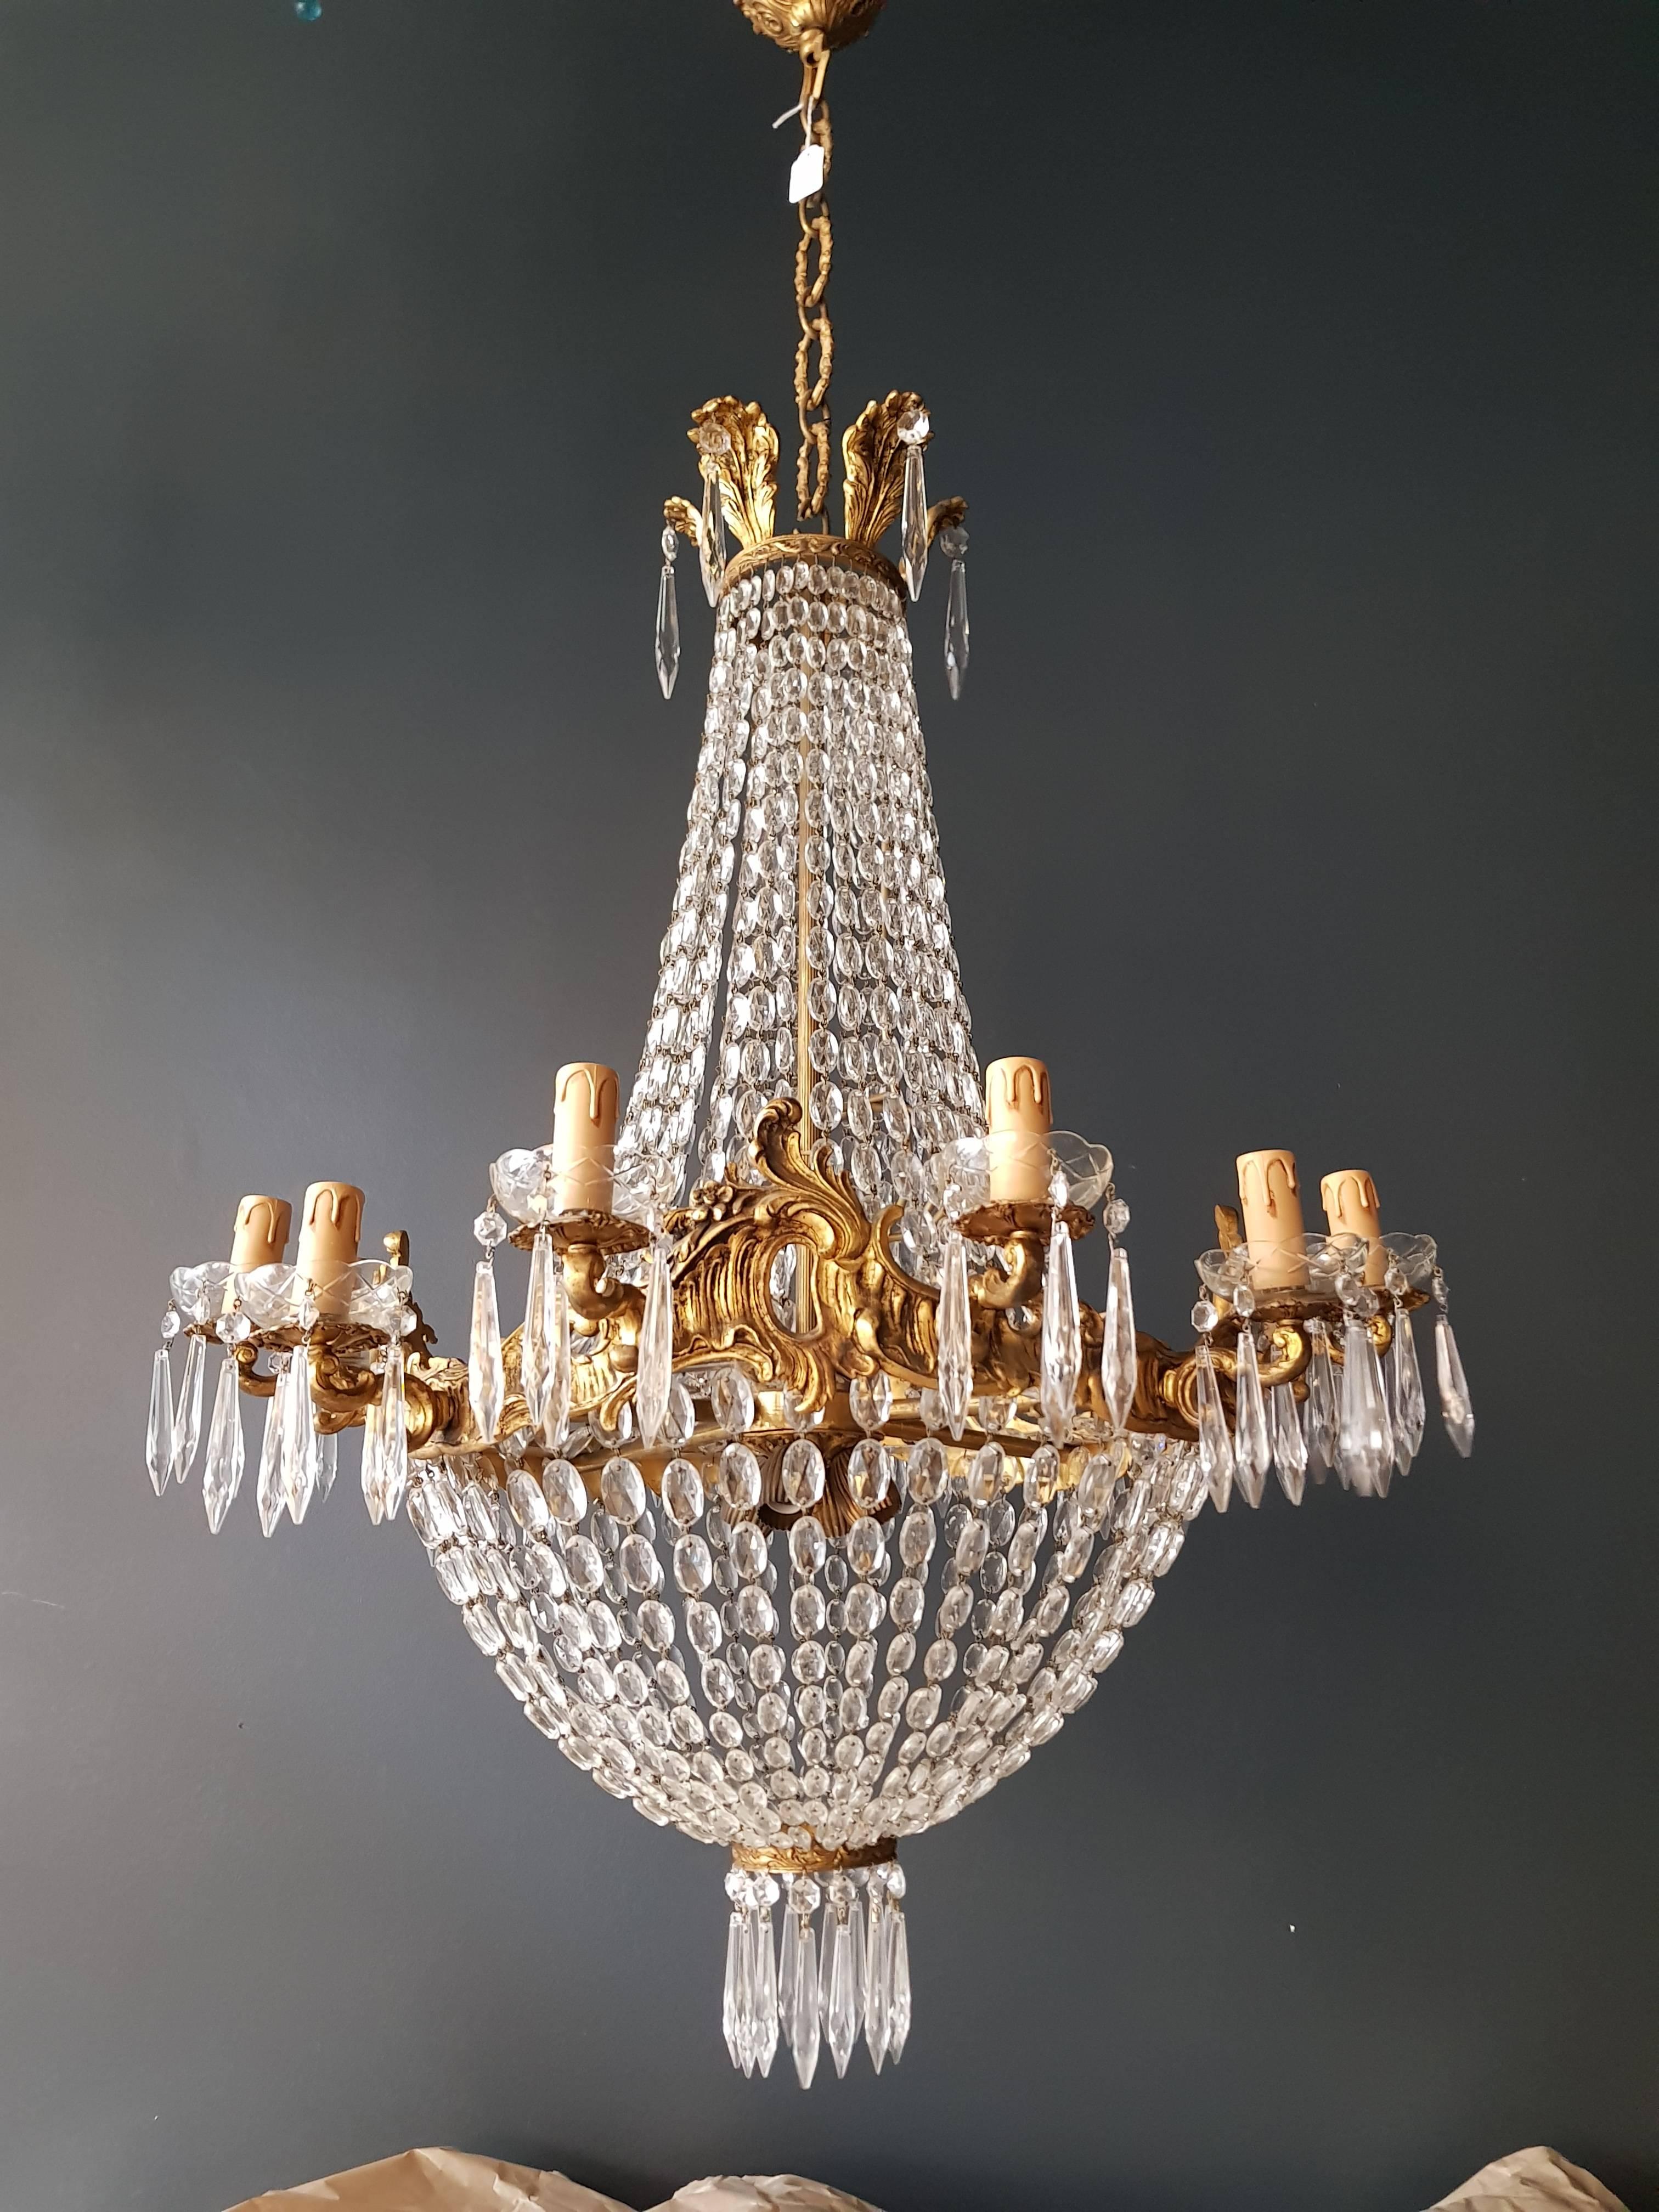 Montgolfière Empire Chandelier Crystal Sac a Pearl Lamp Lustre Basket

Old chandelier with love and professionally restored in Berlin. electrical wiring works in the US.
Re-wired and ready to hang
Cabling and sockets completely renewed. Glass hand